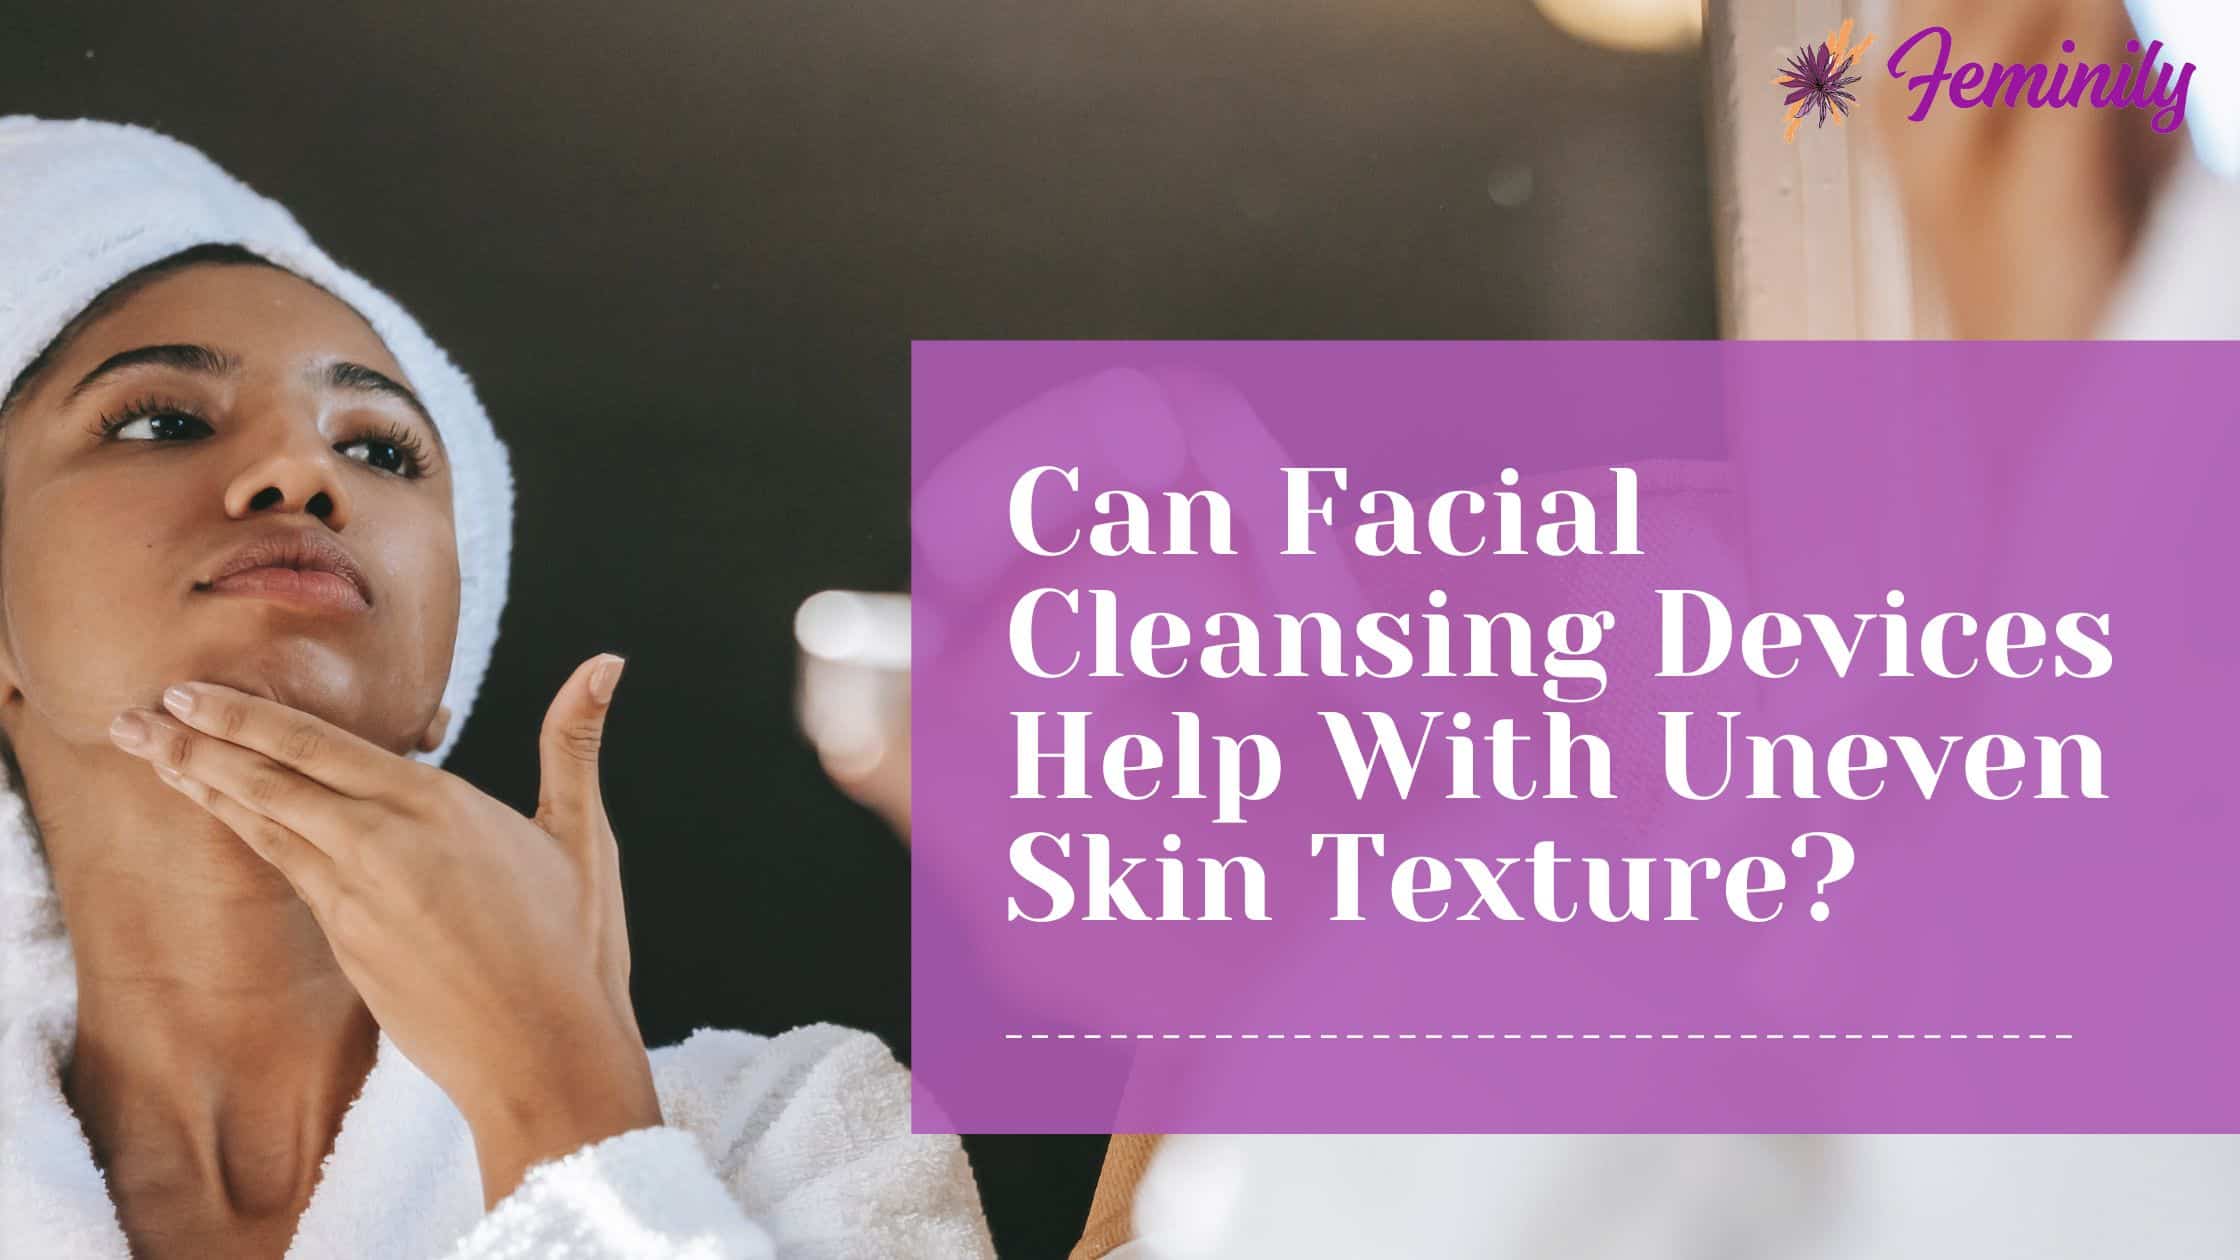 Can facial cleansing devices help with uneven skin texture